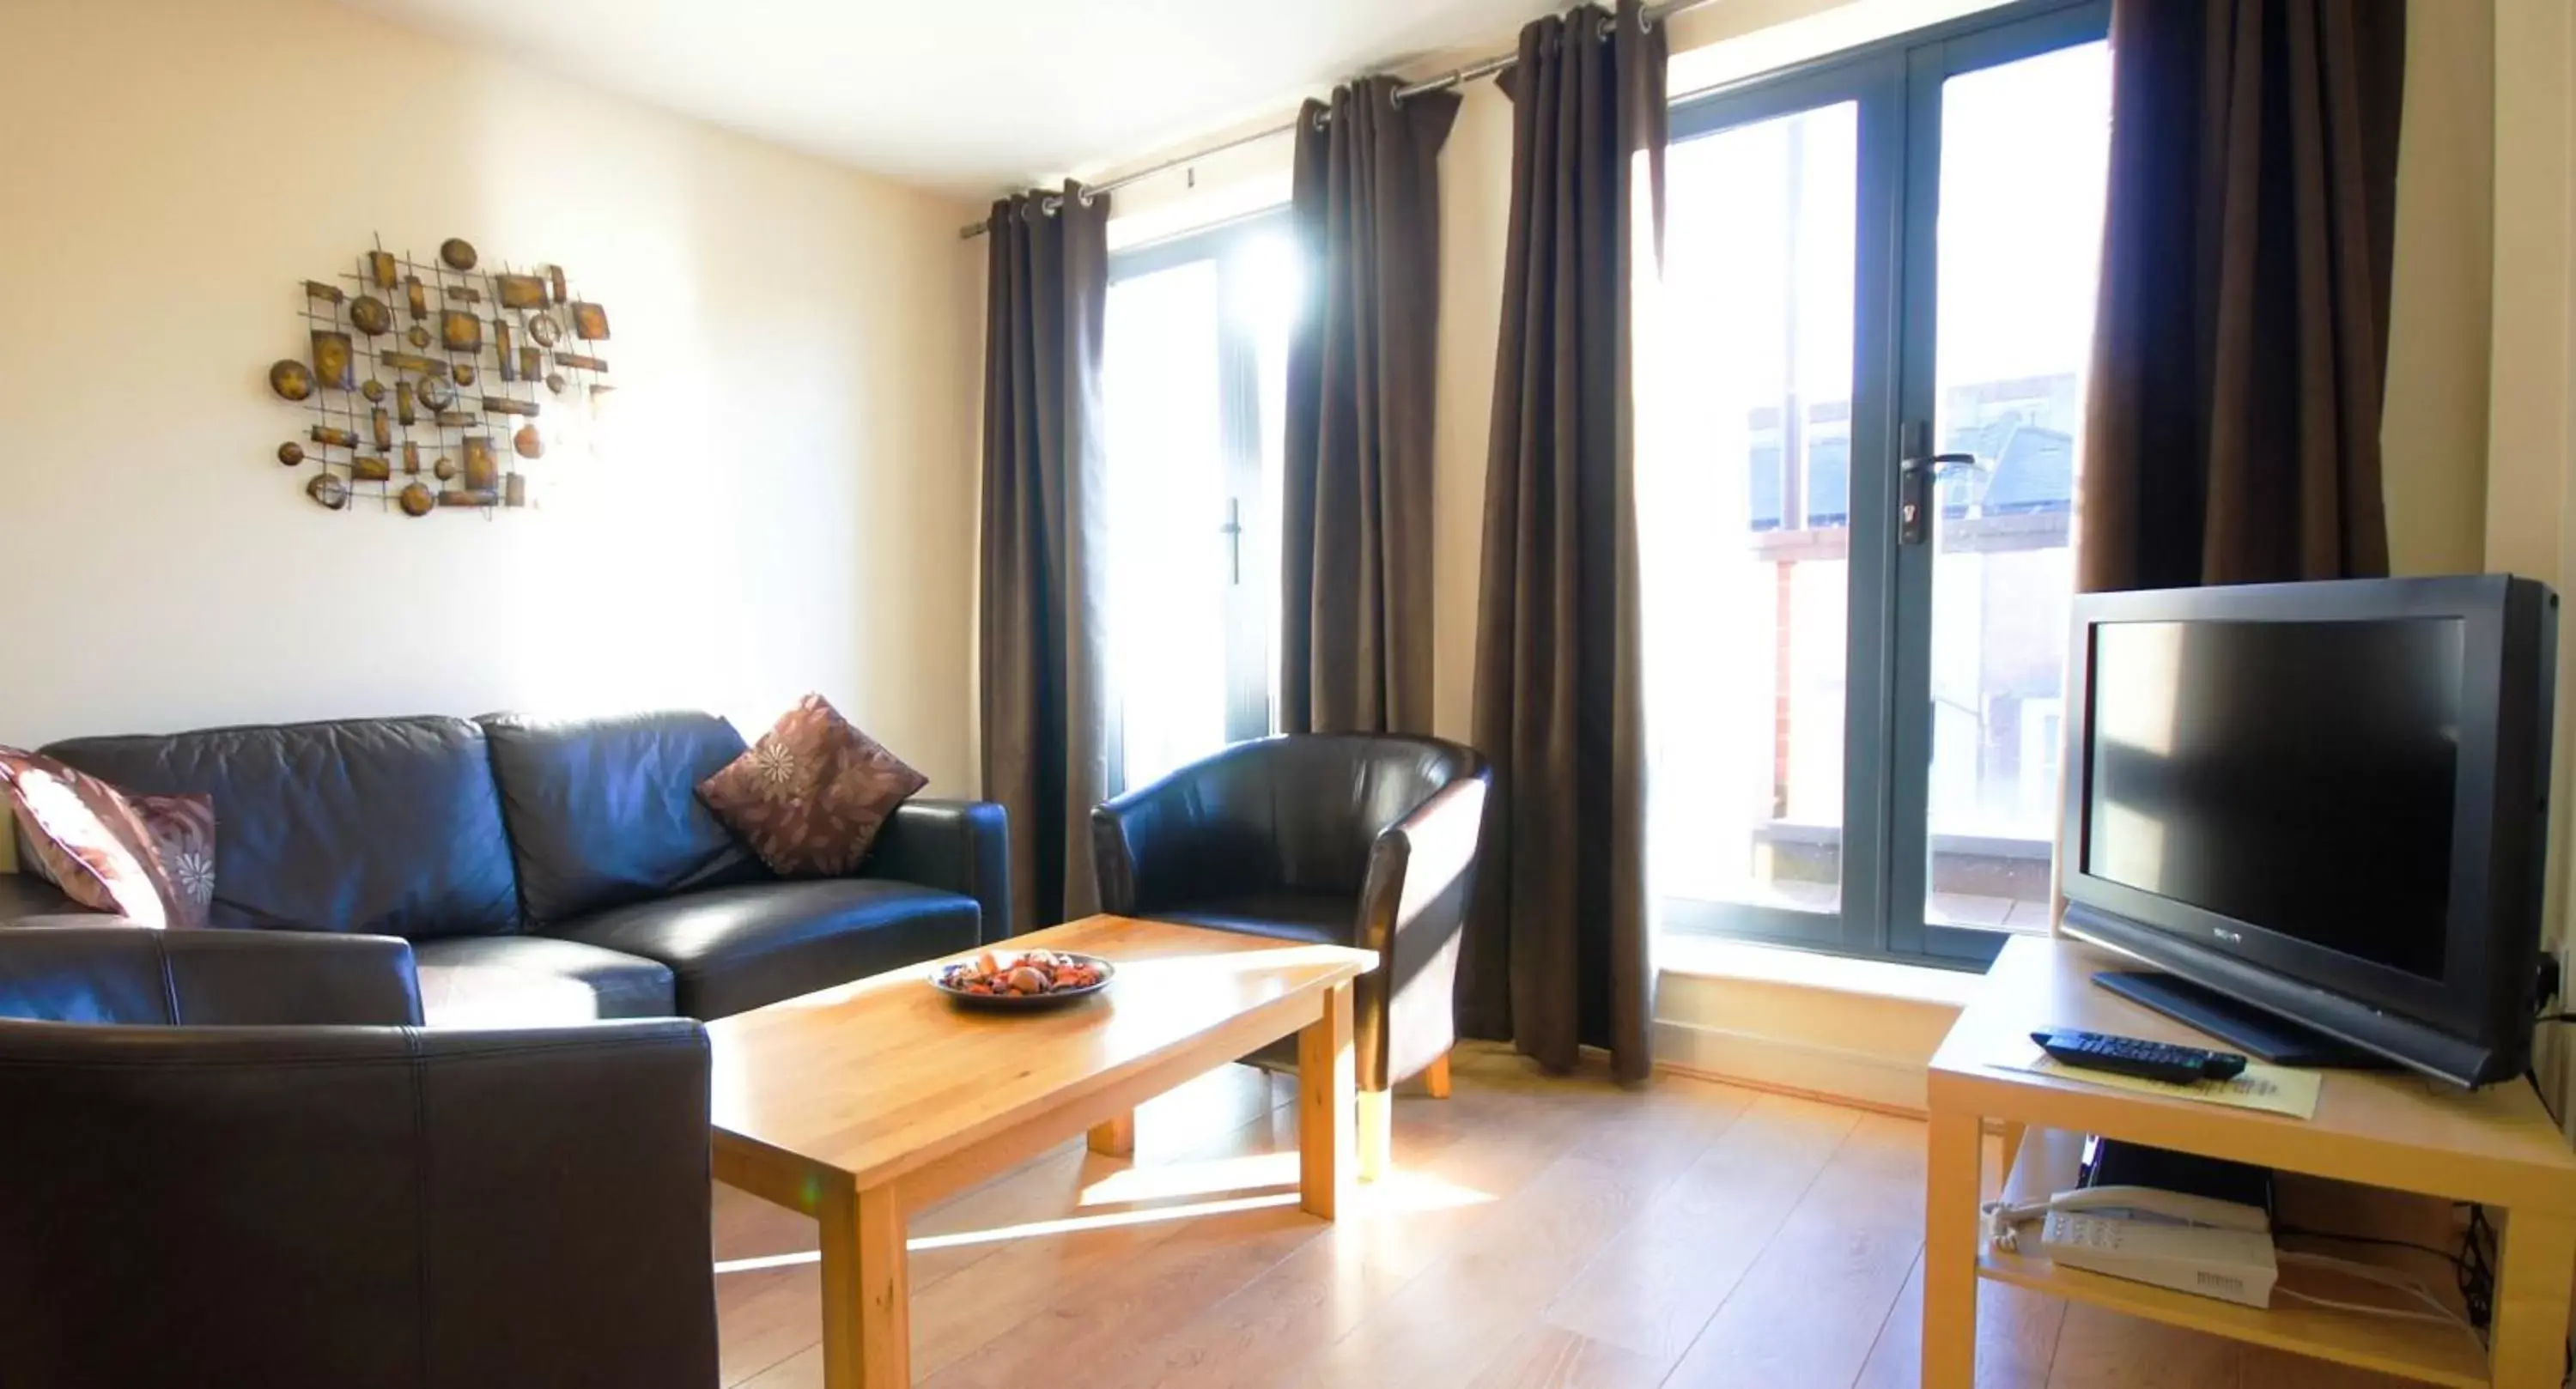 Standard Two-Bedroom Apartment in Lodge Drive Serviced Apartments